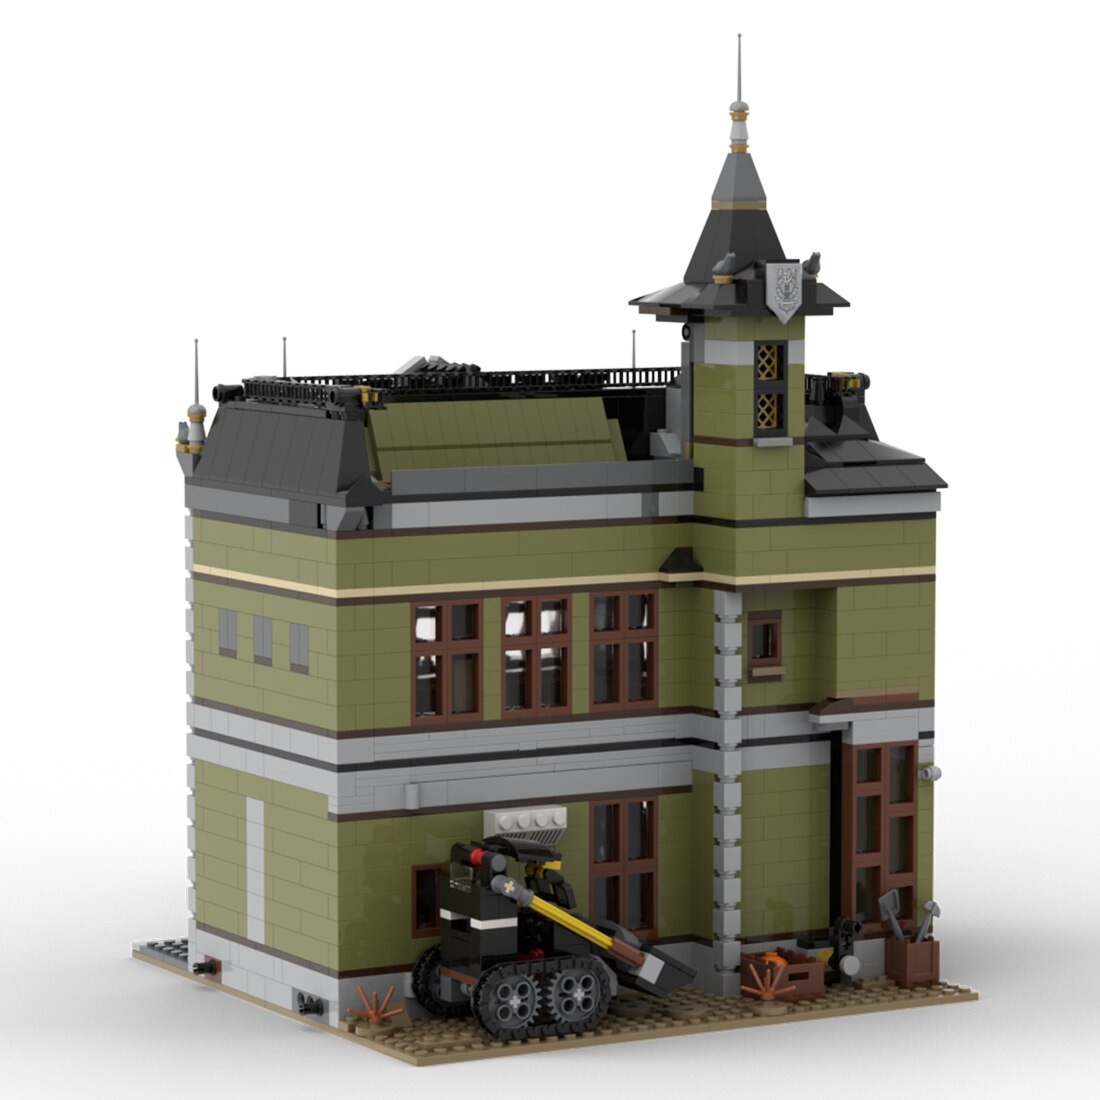 MOC-124106 Museum of Exploration and Adventure With 2701 Pieces